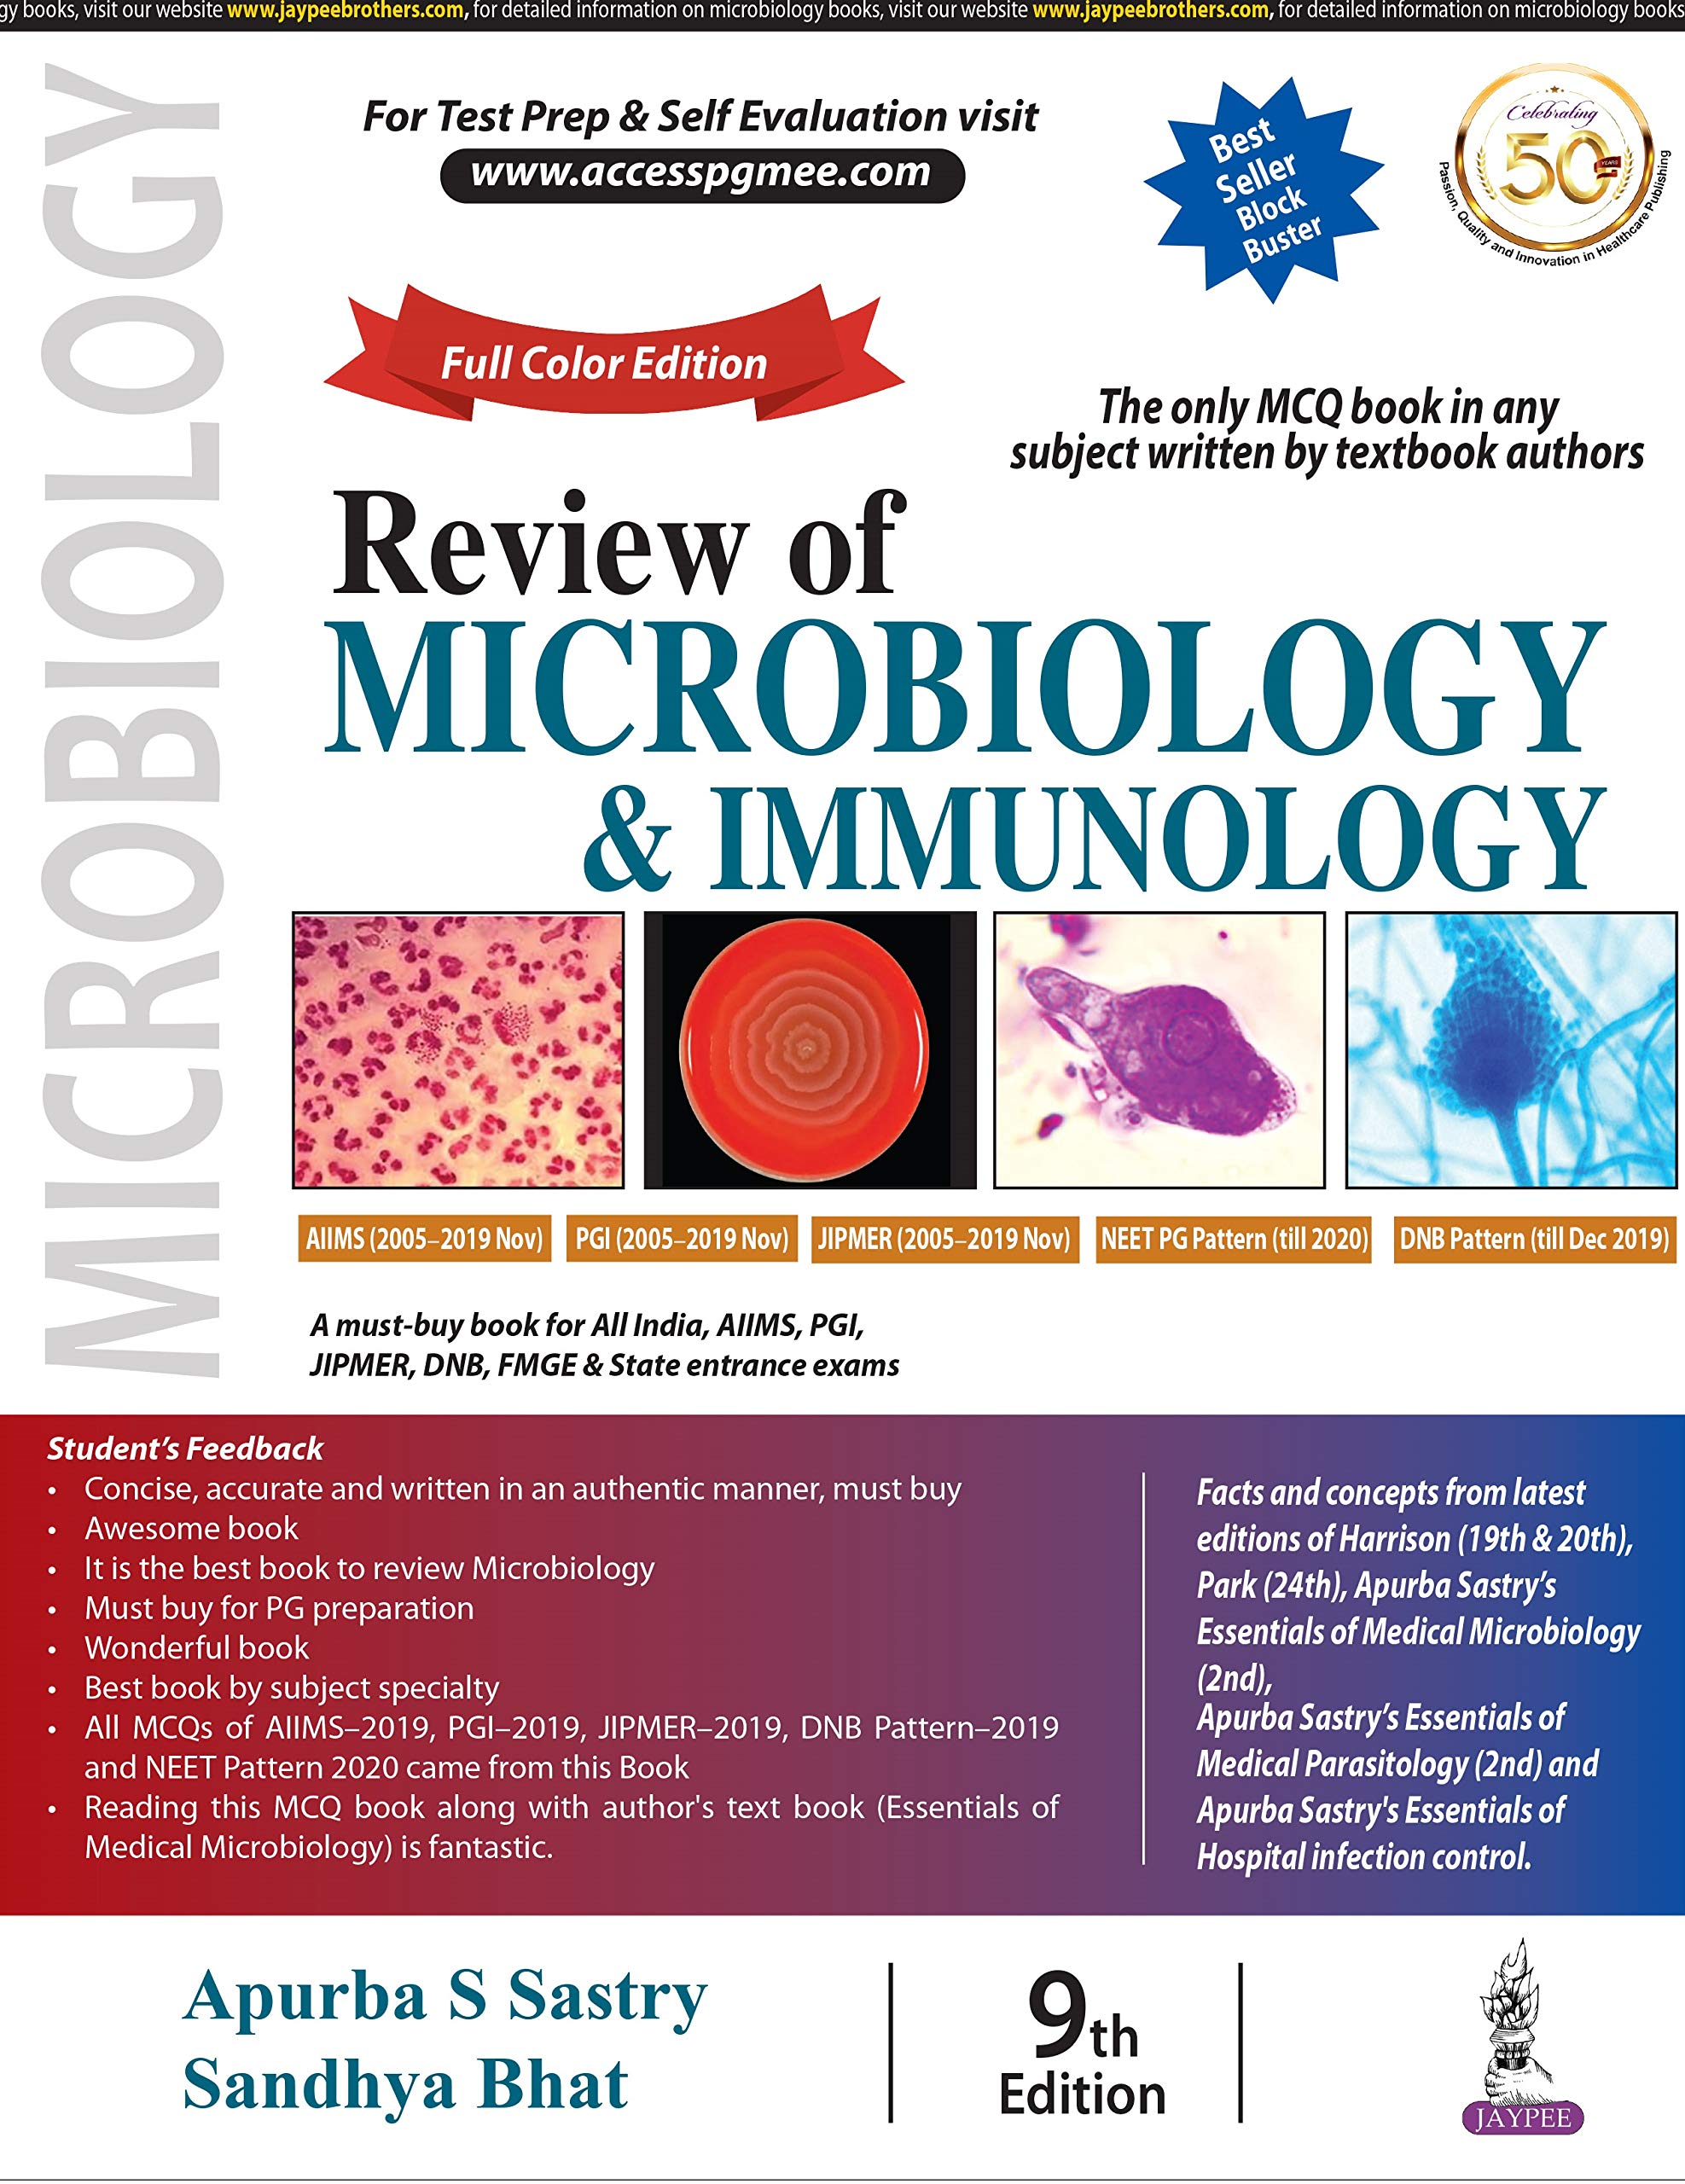 Review of Microbiology & Immunology 9th edition 2020